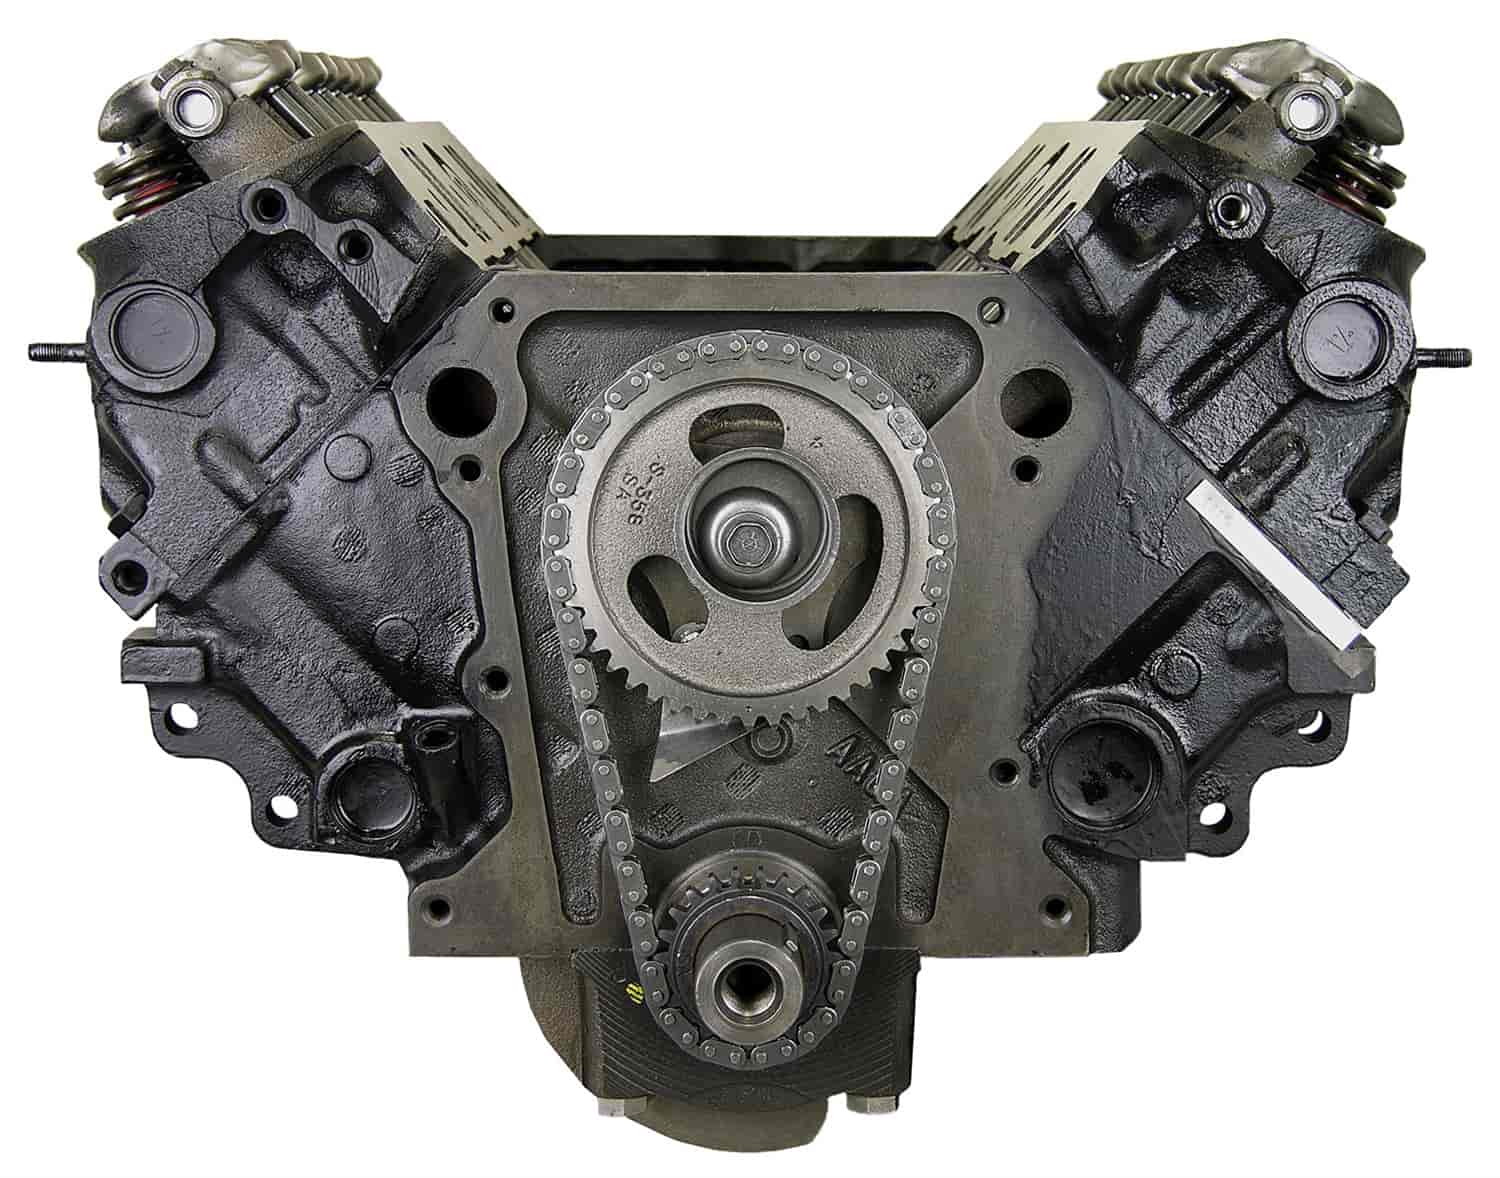 Remanufactured Crate Engine for Marine Applications with 1975-1988 Small Block Chrysler 330ci/5.9L